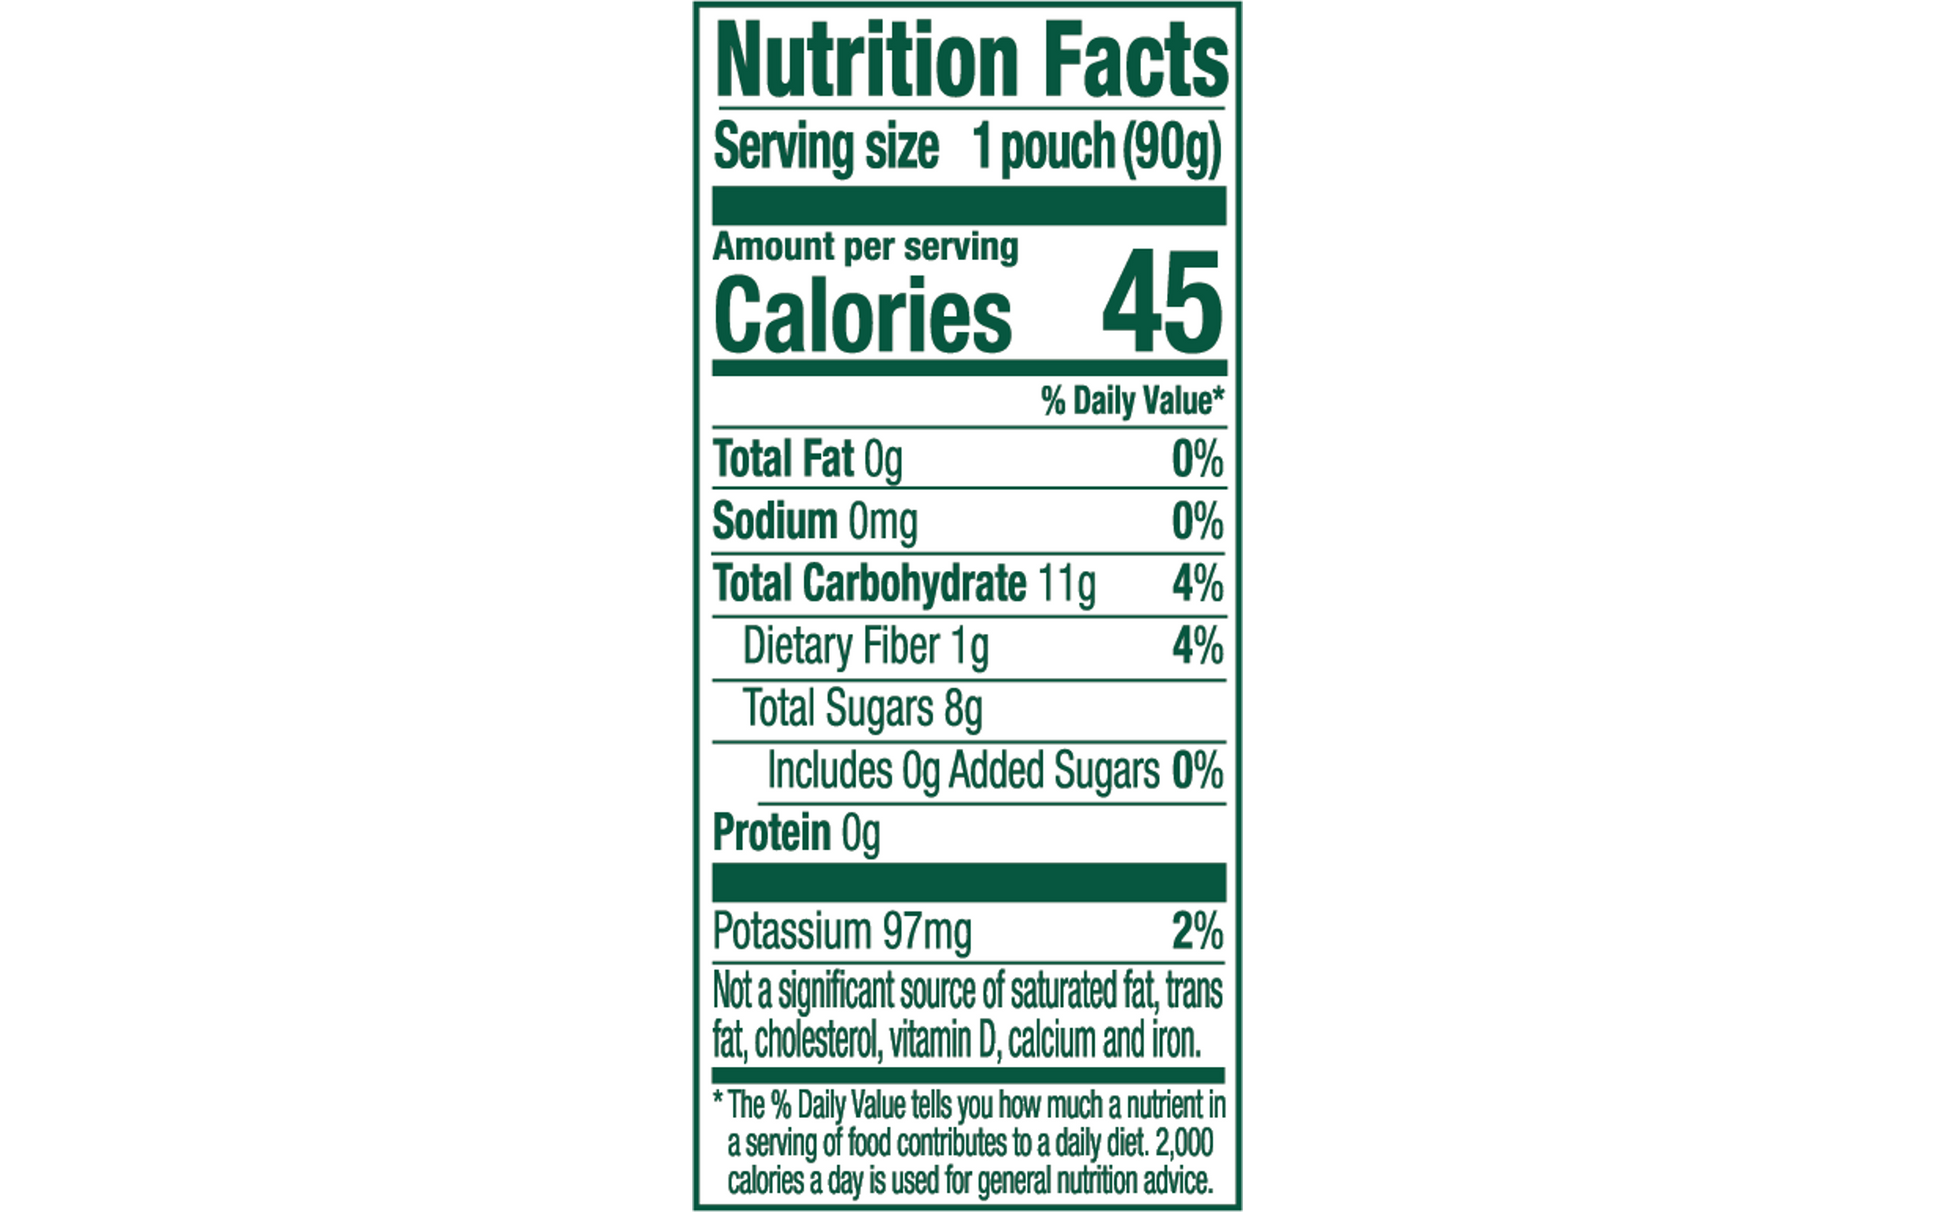 Nutrition facts for Buddy Fruits Strawberry & Apple fruit pouch.